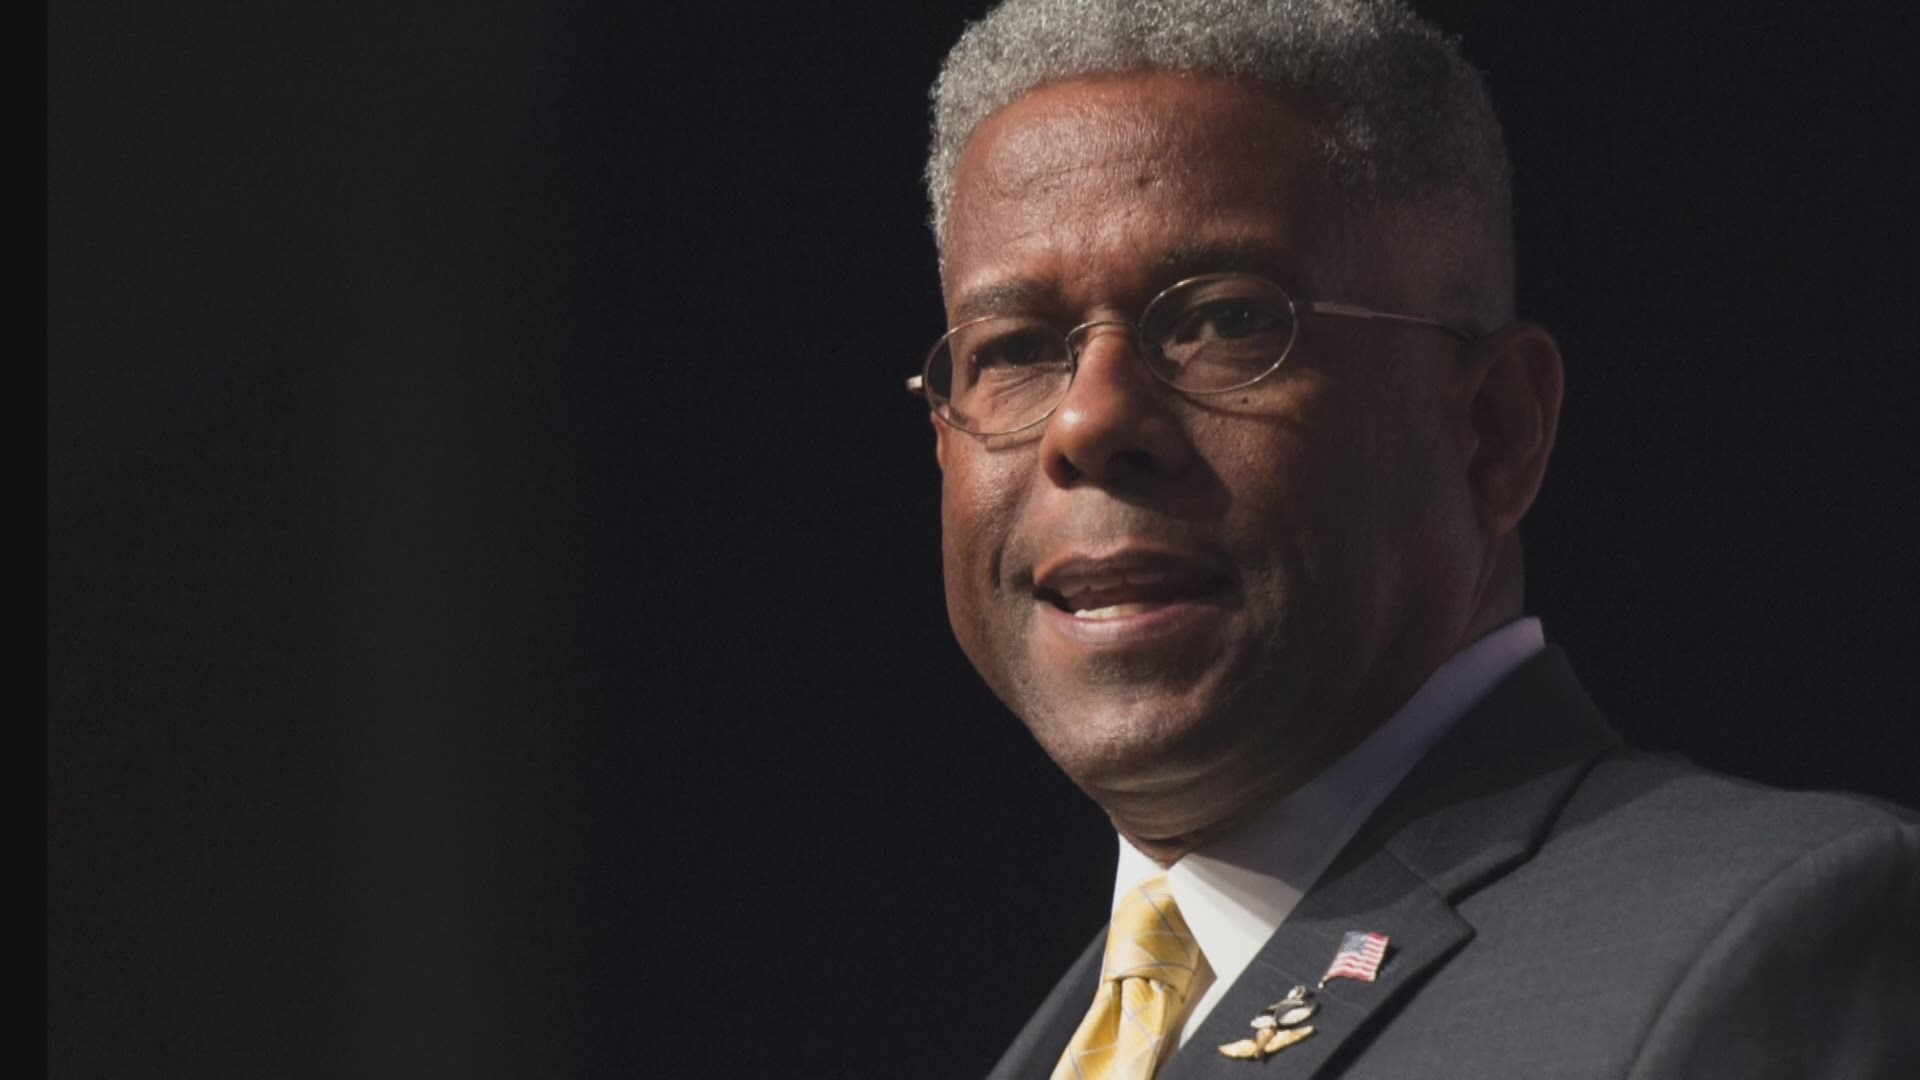 Allen West was elected as a Florida congressman in 2010 and later moved to Texas. He announced his resignation Friday morning.